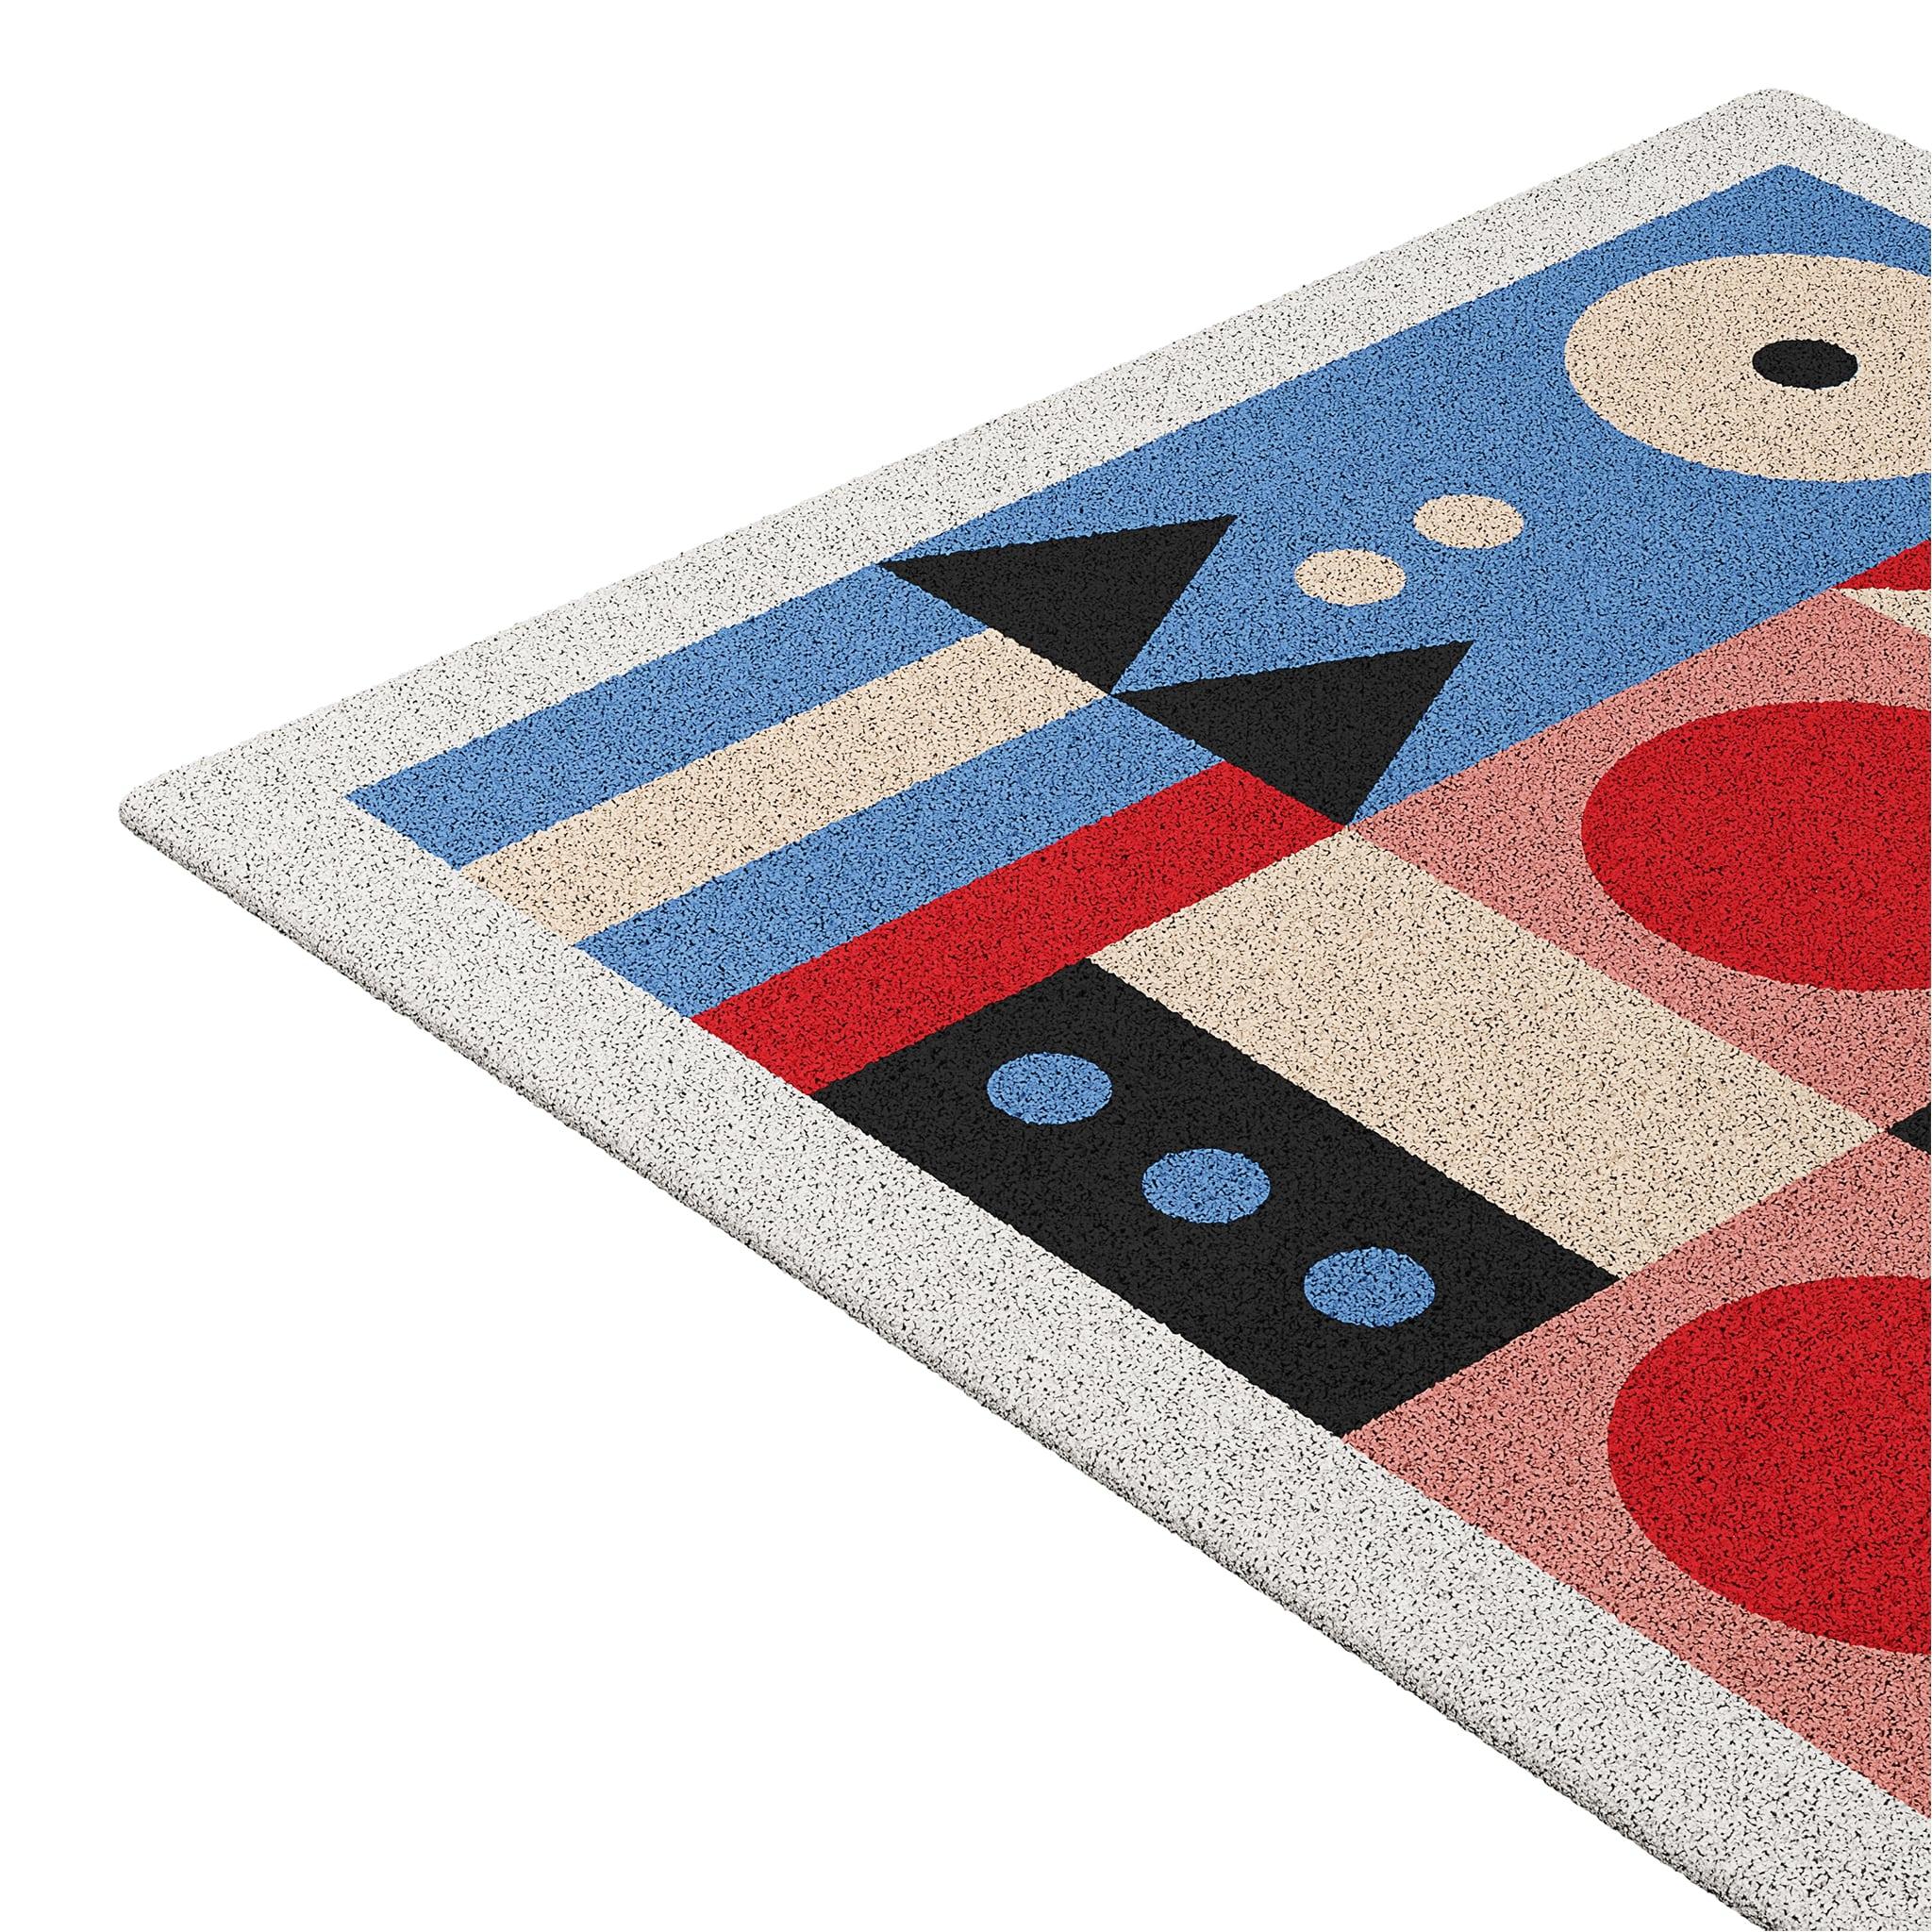 Tapis Kids #012 is a fun rug for playful and creative moments. It was made to be enjoyed with your loved ones, creating happy memories that will last a lifetime. 

Handcrafted with Wool, an environmentally friendly material, this kid rug was made